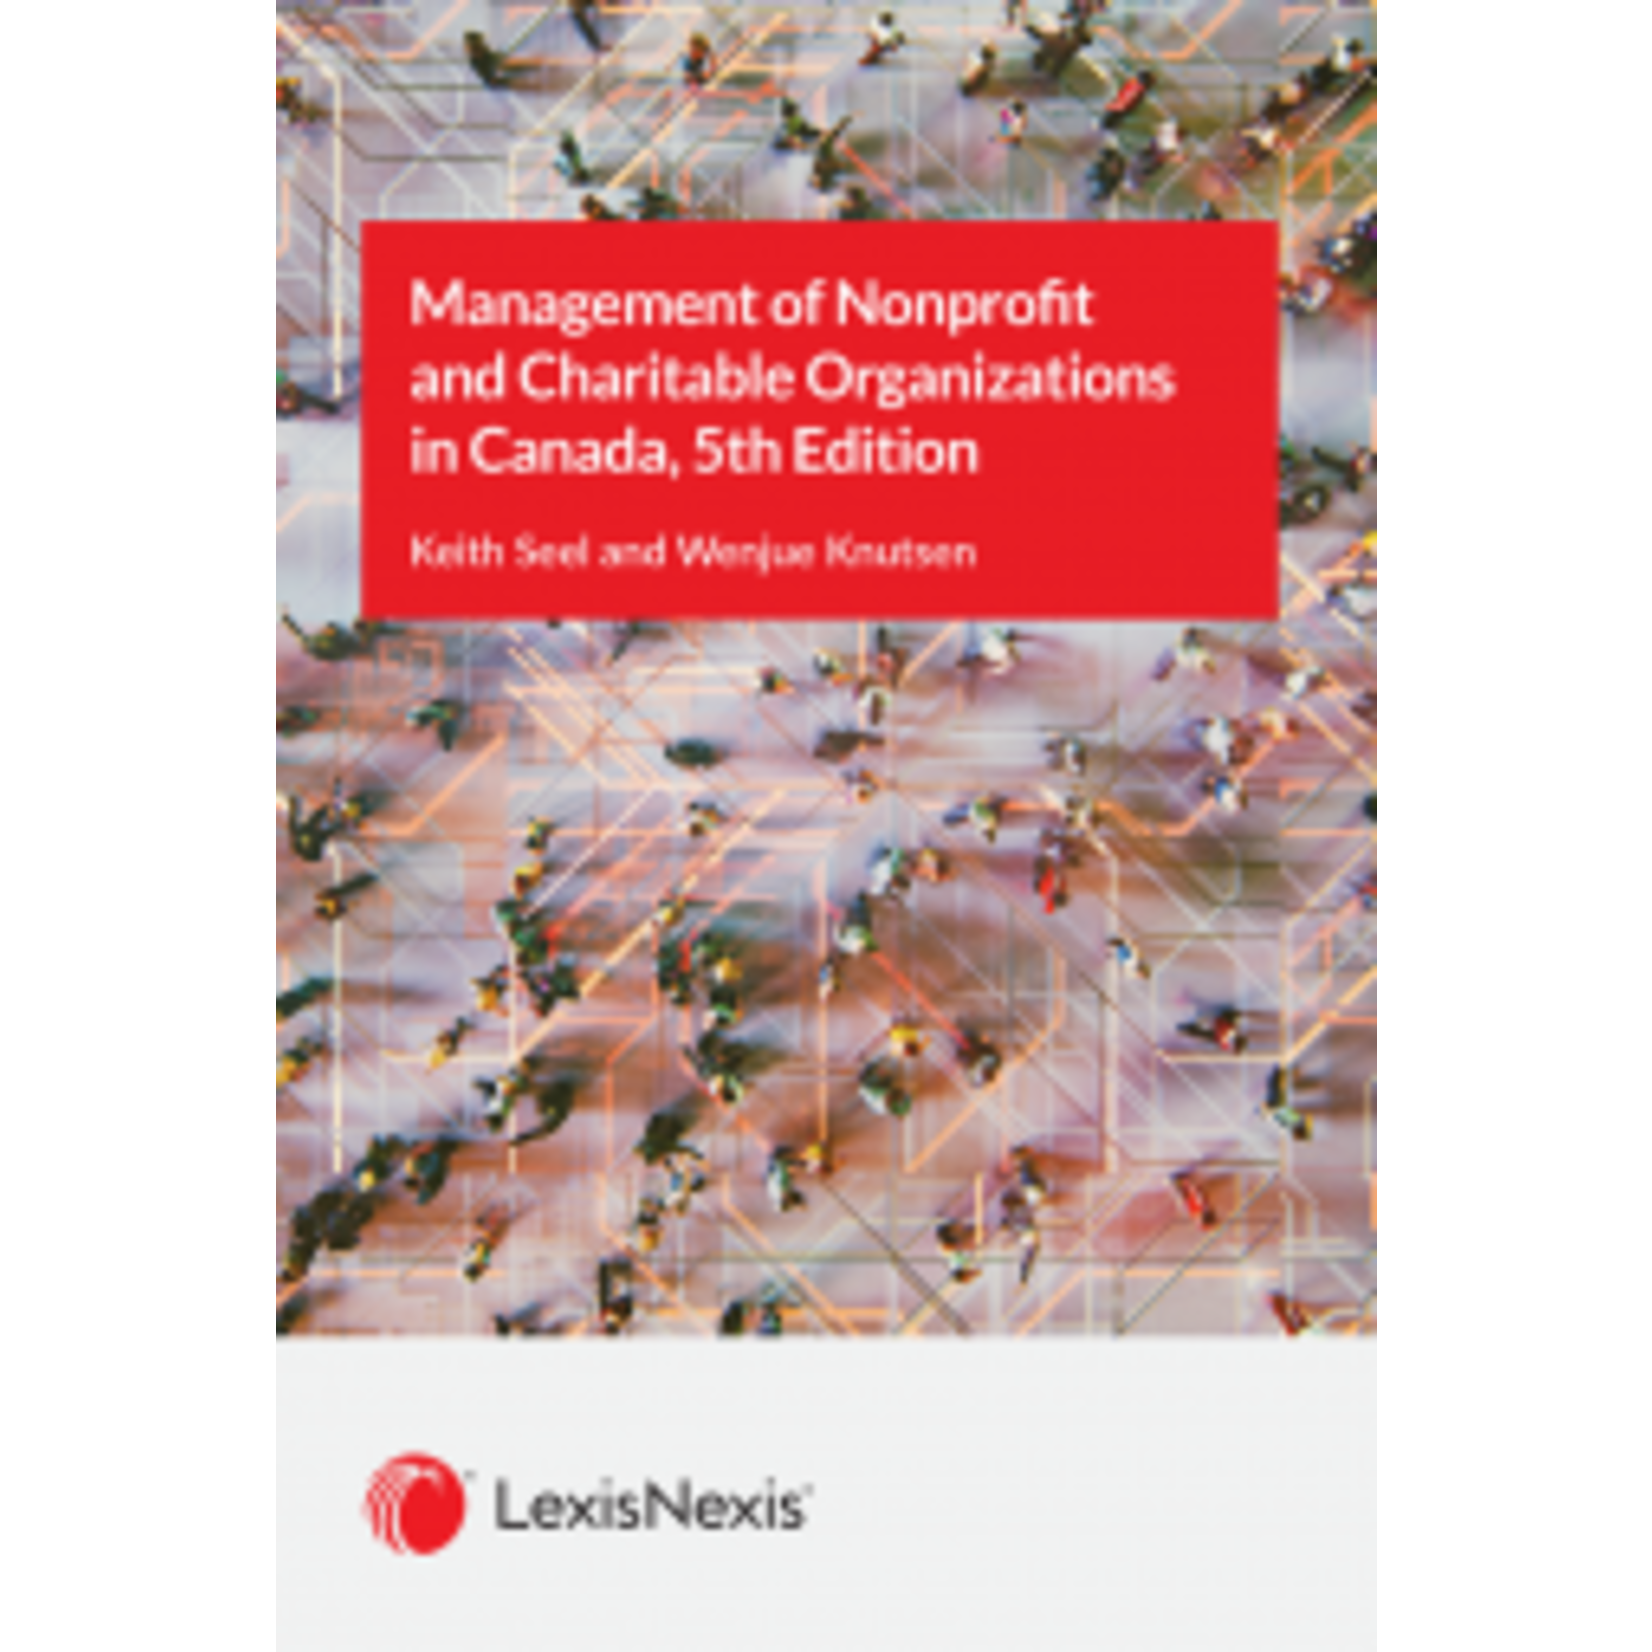 Management of Nonprofit and Charitable Organizations in Canada 5th Edition